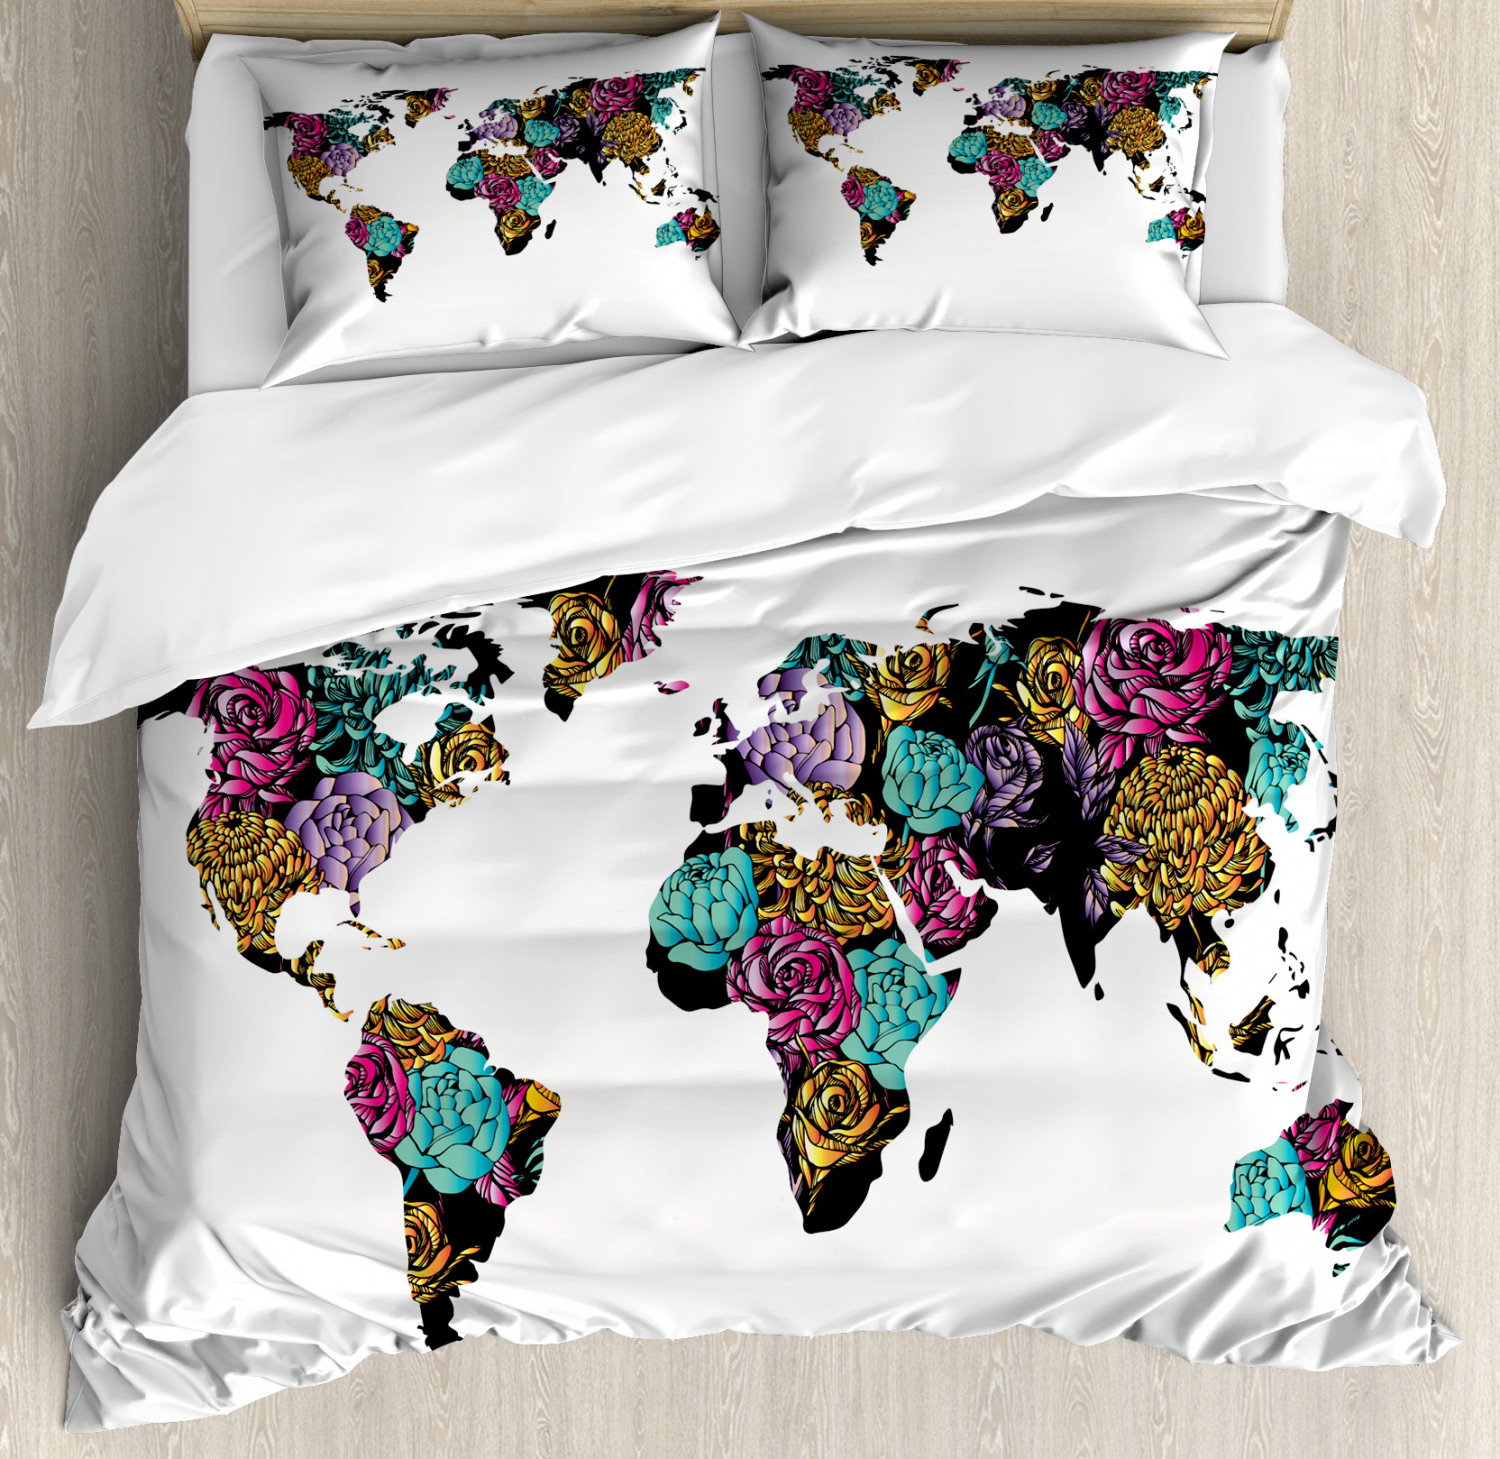 Shabby Chic King Size Duvet Cover Set World Map Flowers With 2